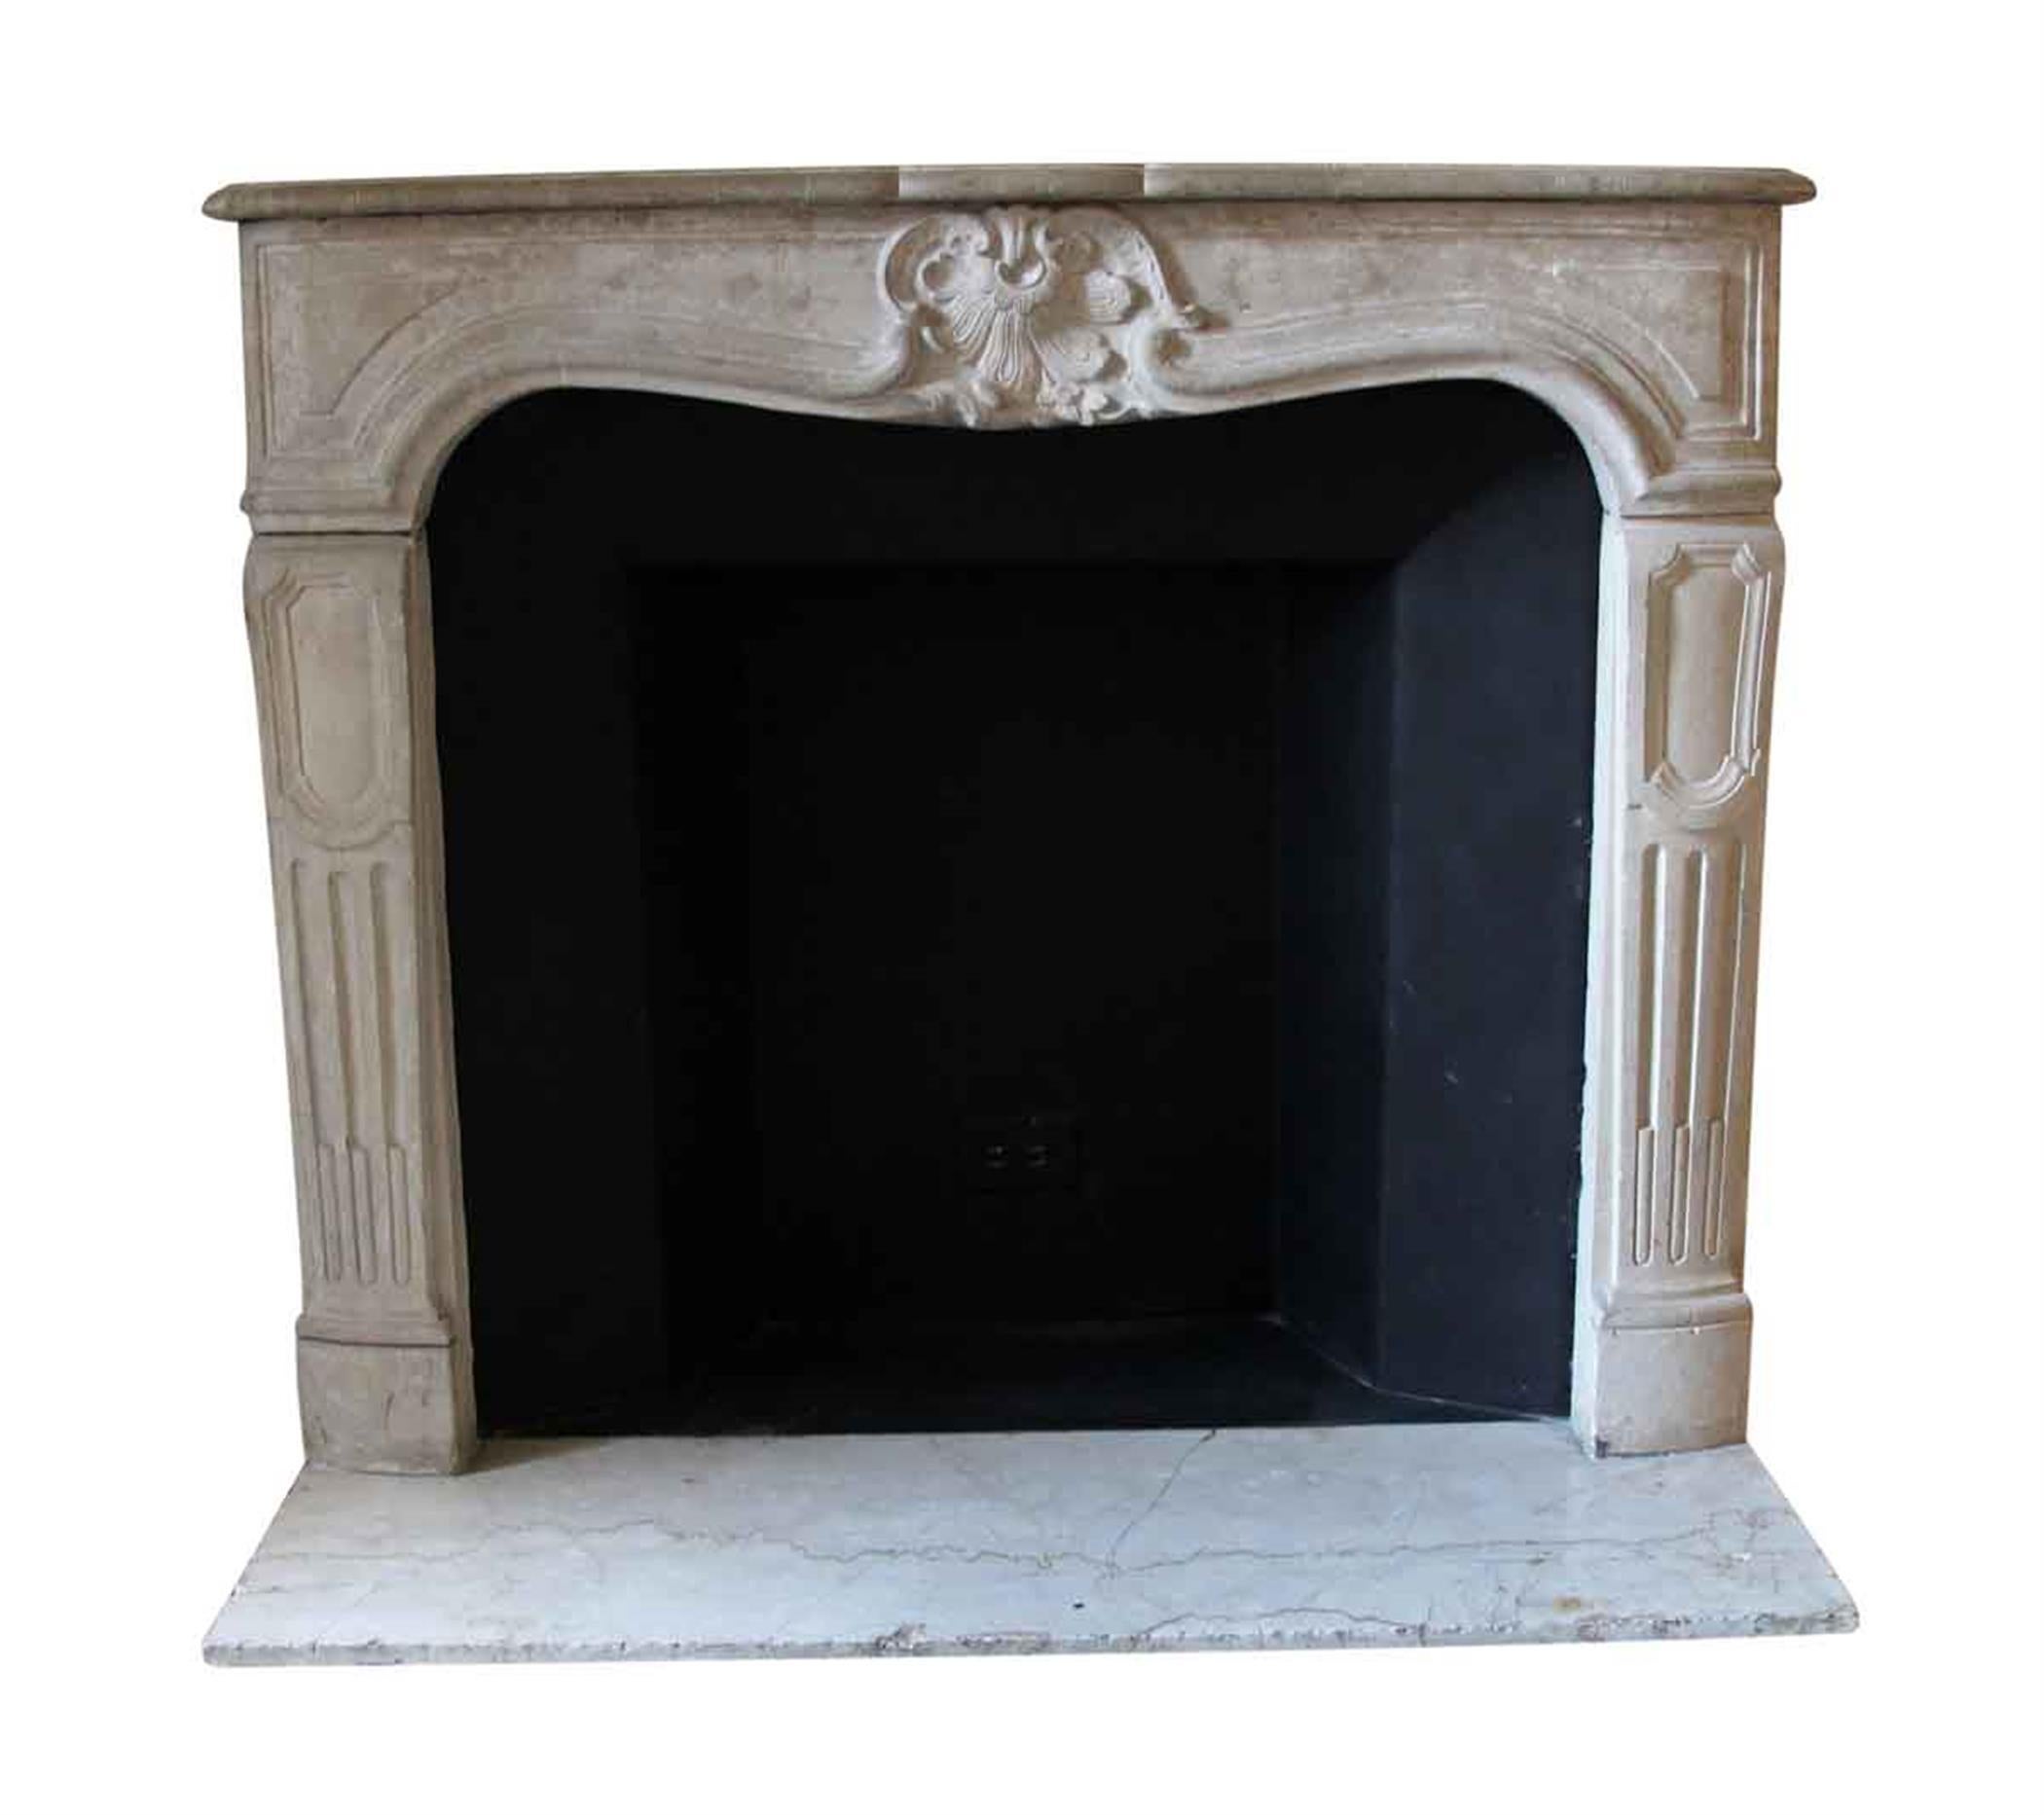 This solid limestone mantel was imported from France and installed in the Waldorf Astoria hotel in the 1930s when the hotel was first build on Park Avenue in New York City. It has light tan coloring with decorative hand-carved details. This